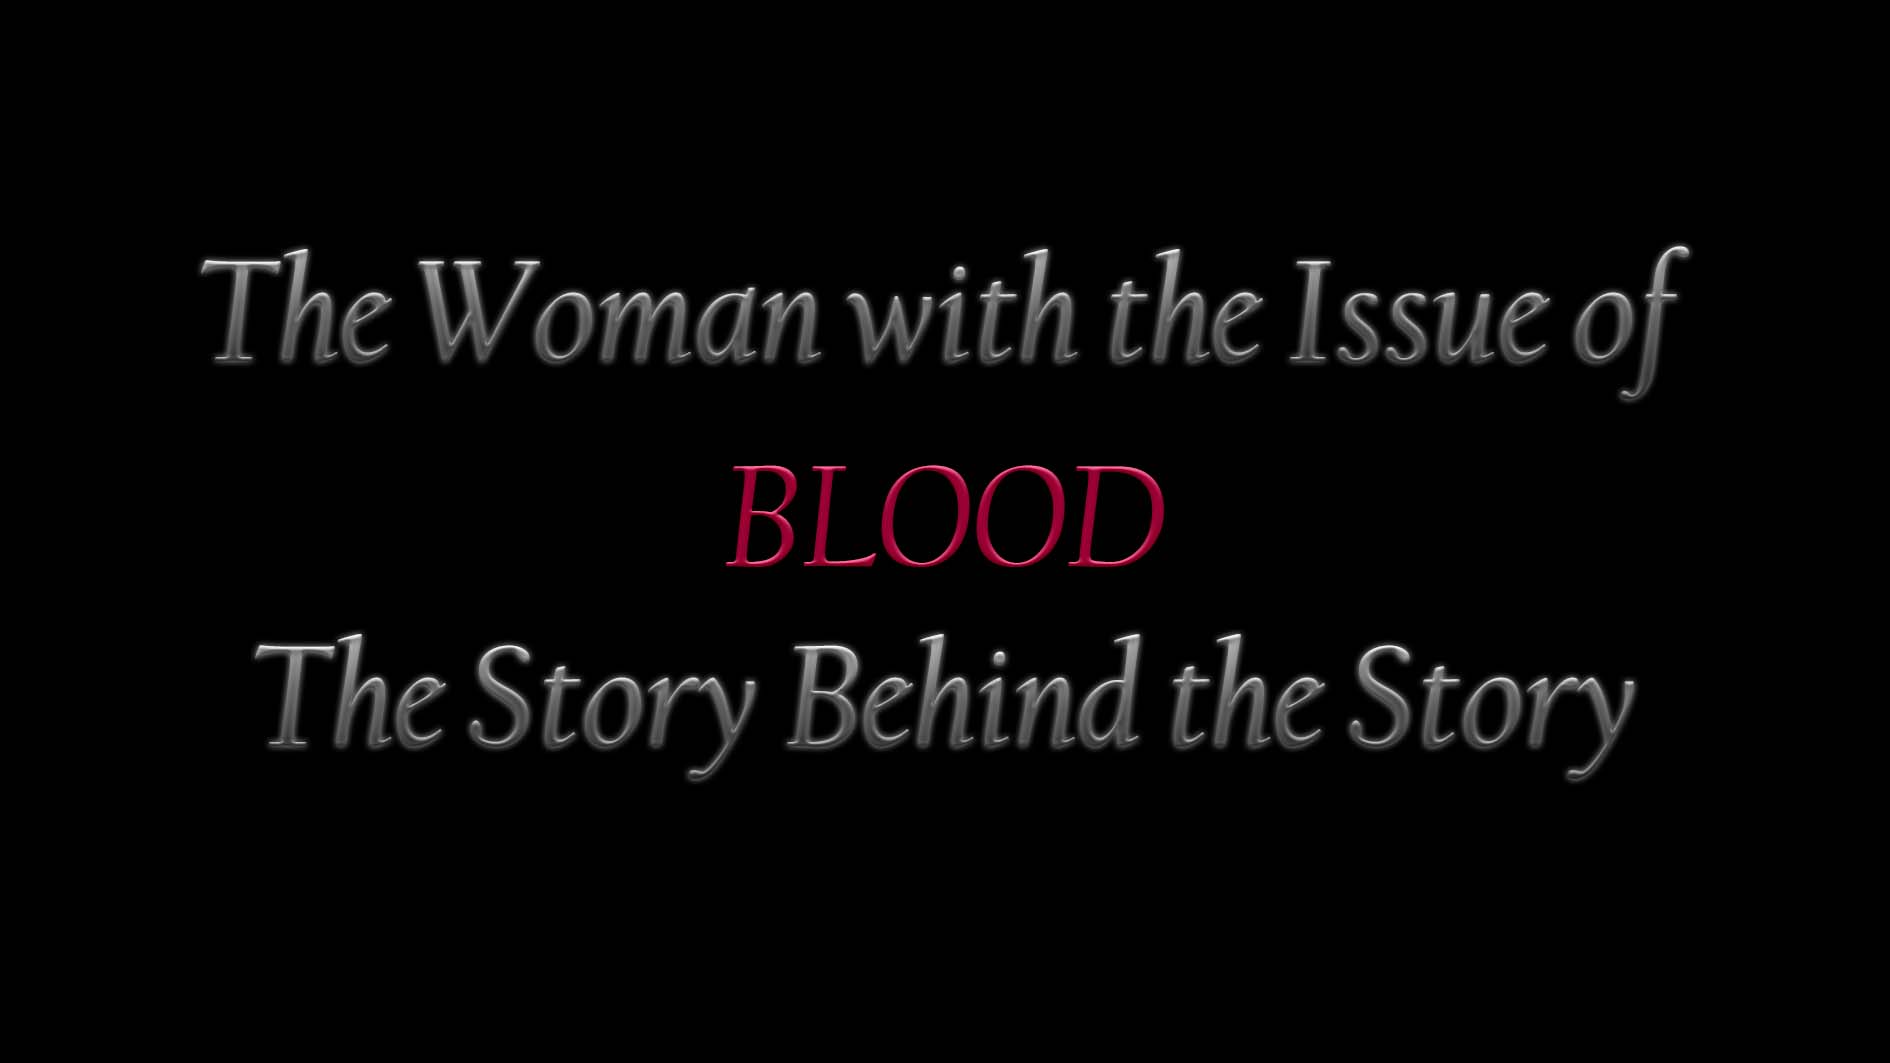 The Woman with the Issue of Blood – The Story Behind the Story